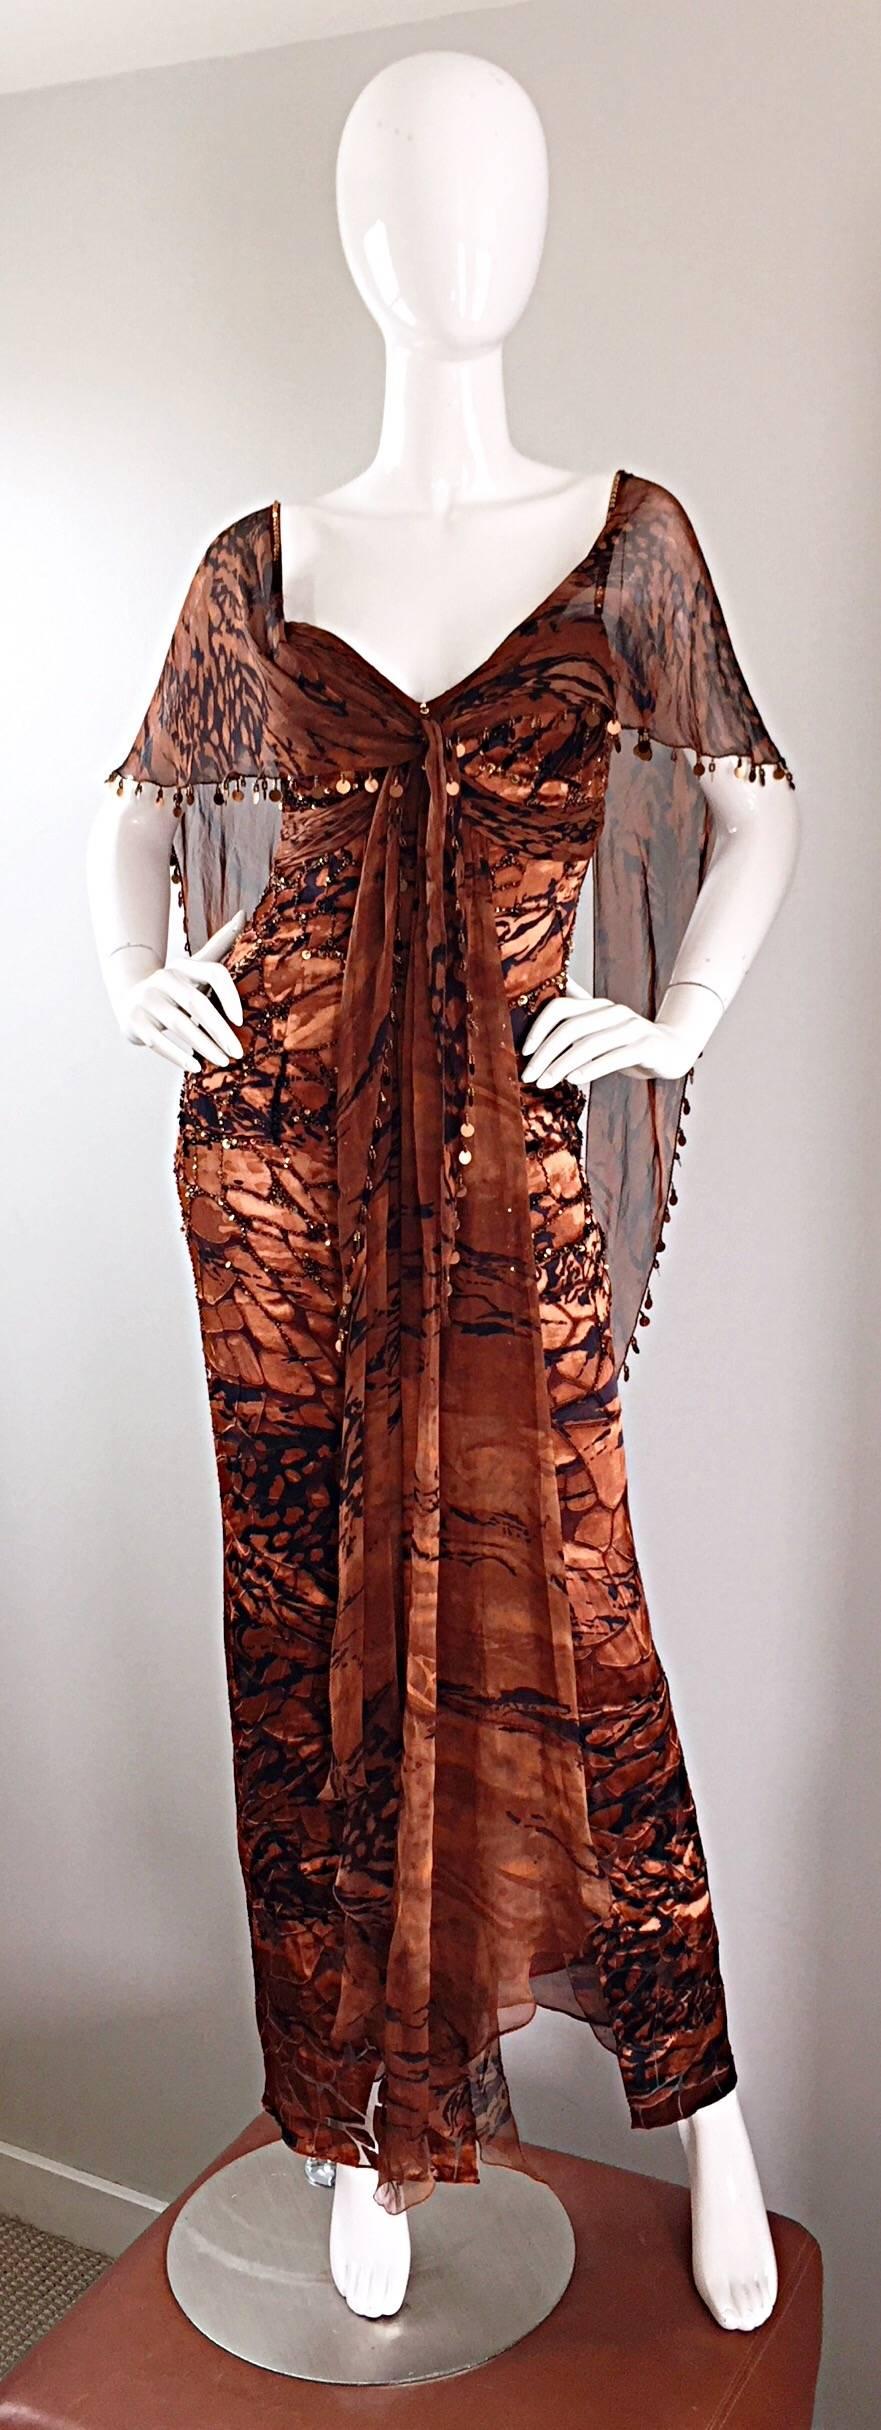 Beautiful vintage DIANE FREIS 1990s silk chiffon flutter boho gown! Features an incredible brown and black abstract animal print. Boned bodice, with layers of chiffon down the front, and an attached chiffon caplet adorned with hand sewn beads and